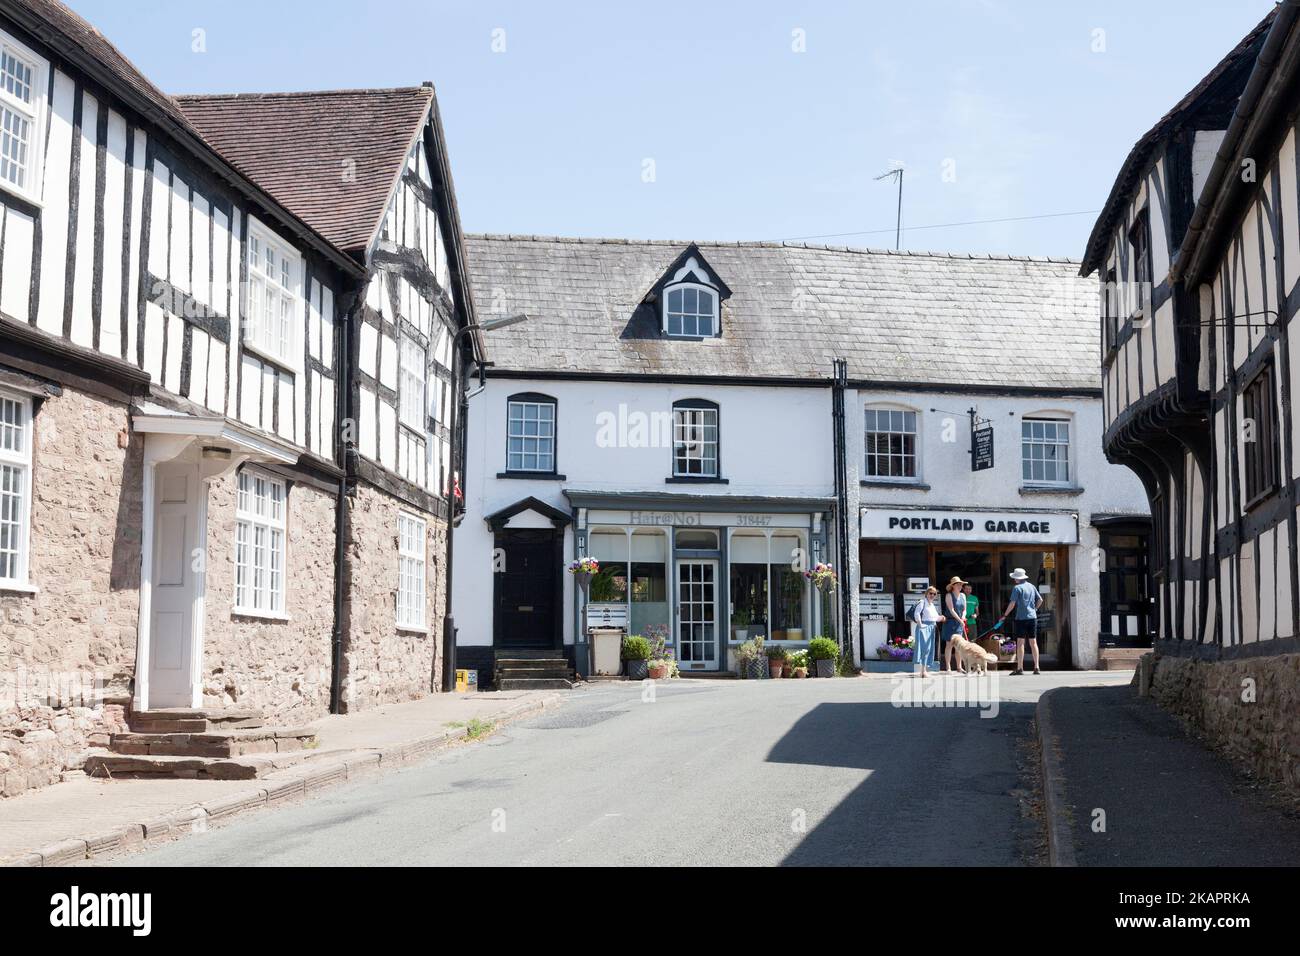 Portland Garage and Hair@No 1 hair salon in village centre, Weobley, Herefordshire Stock Photo